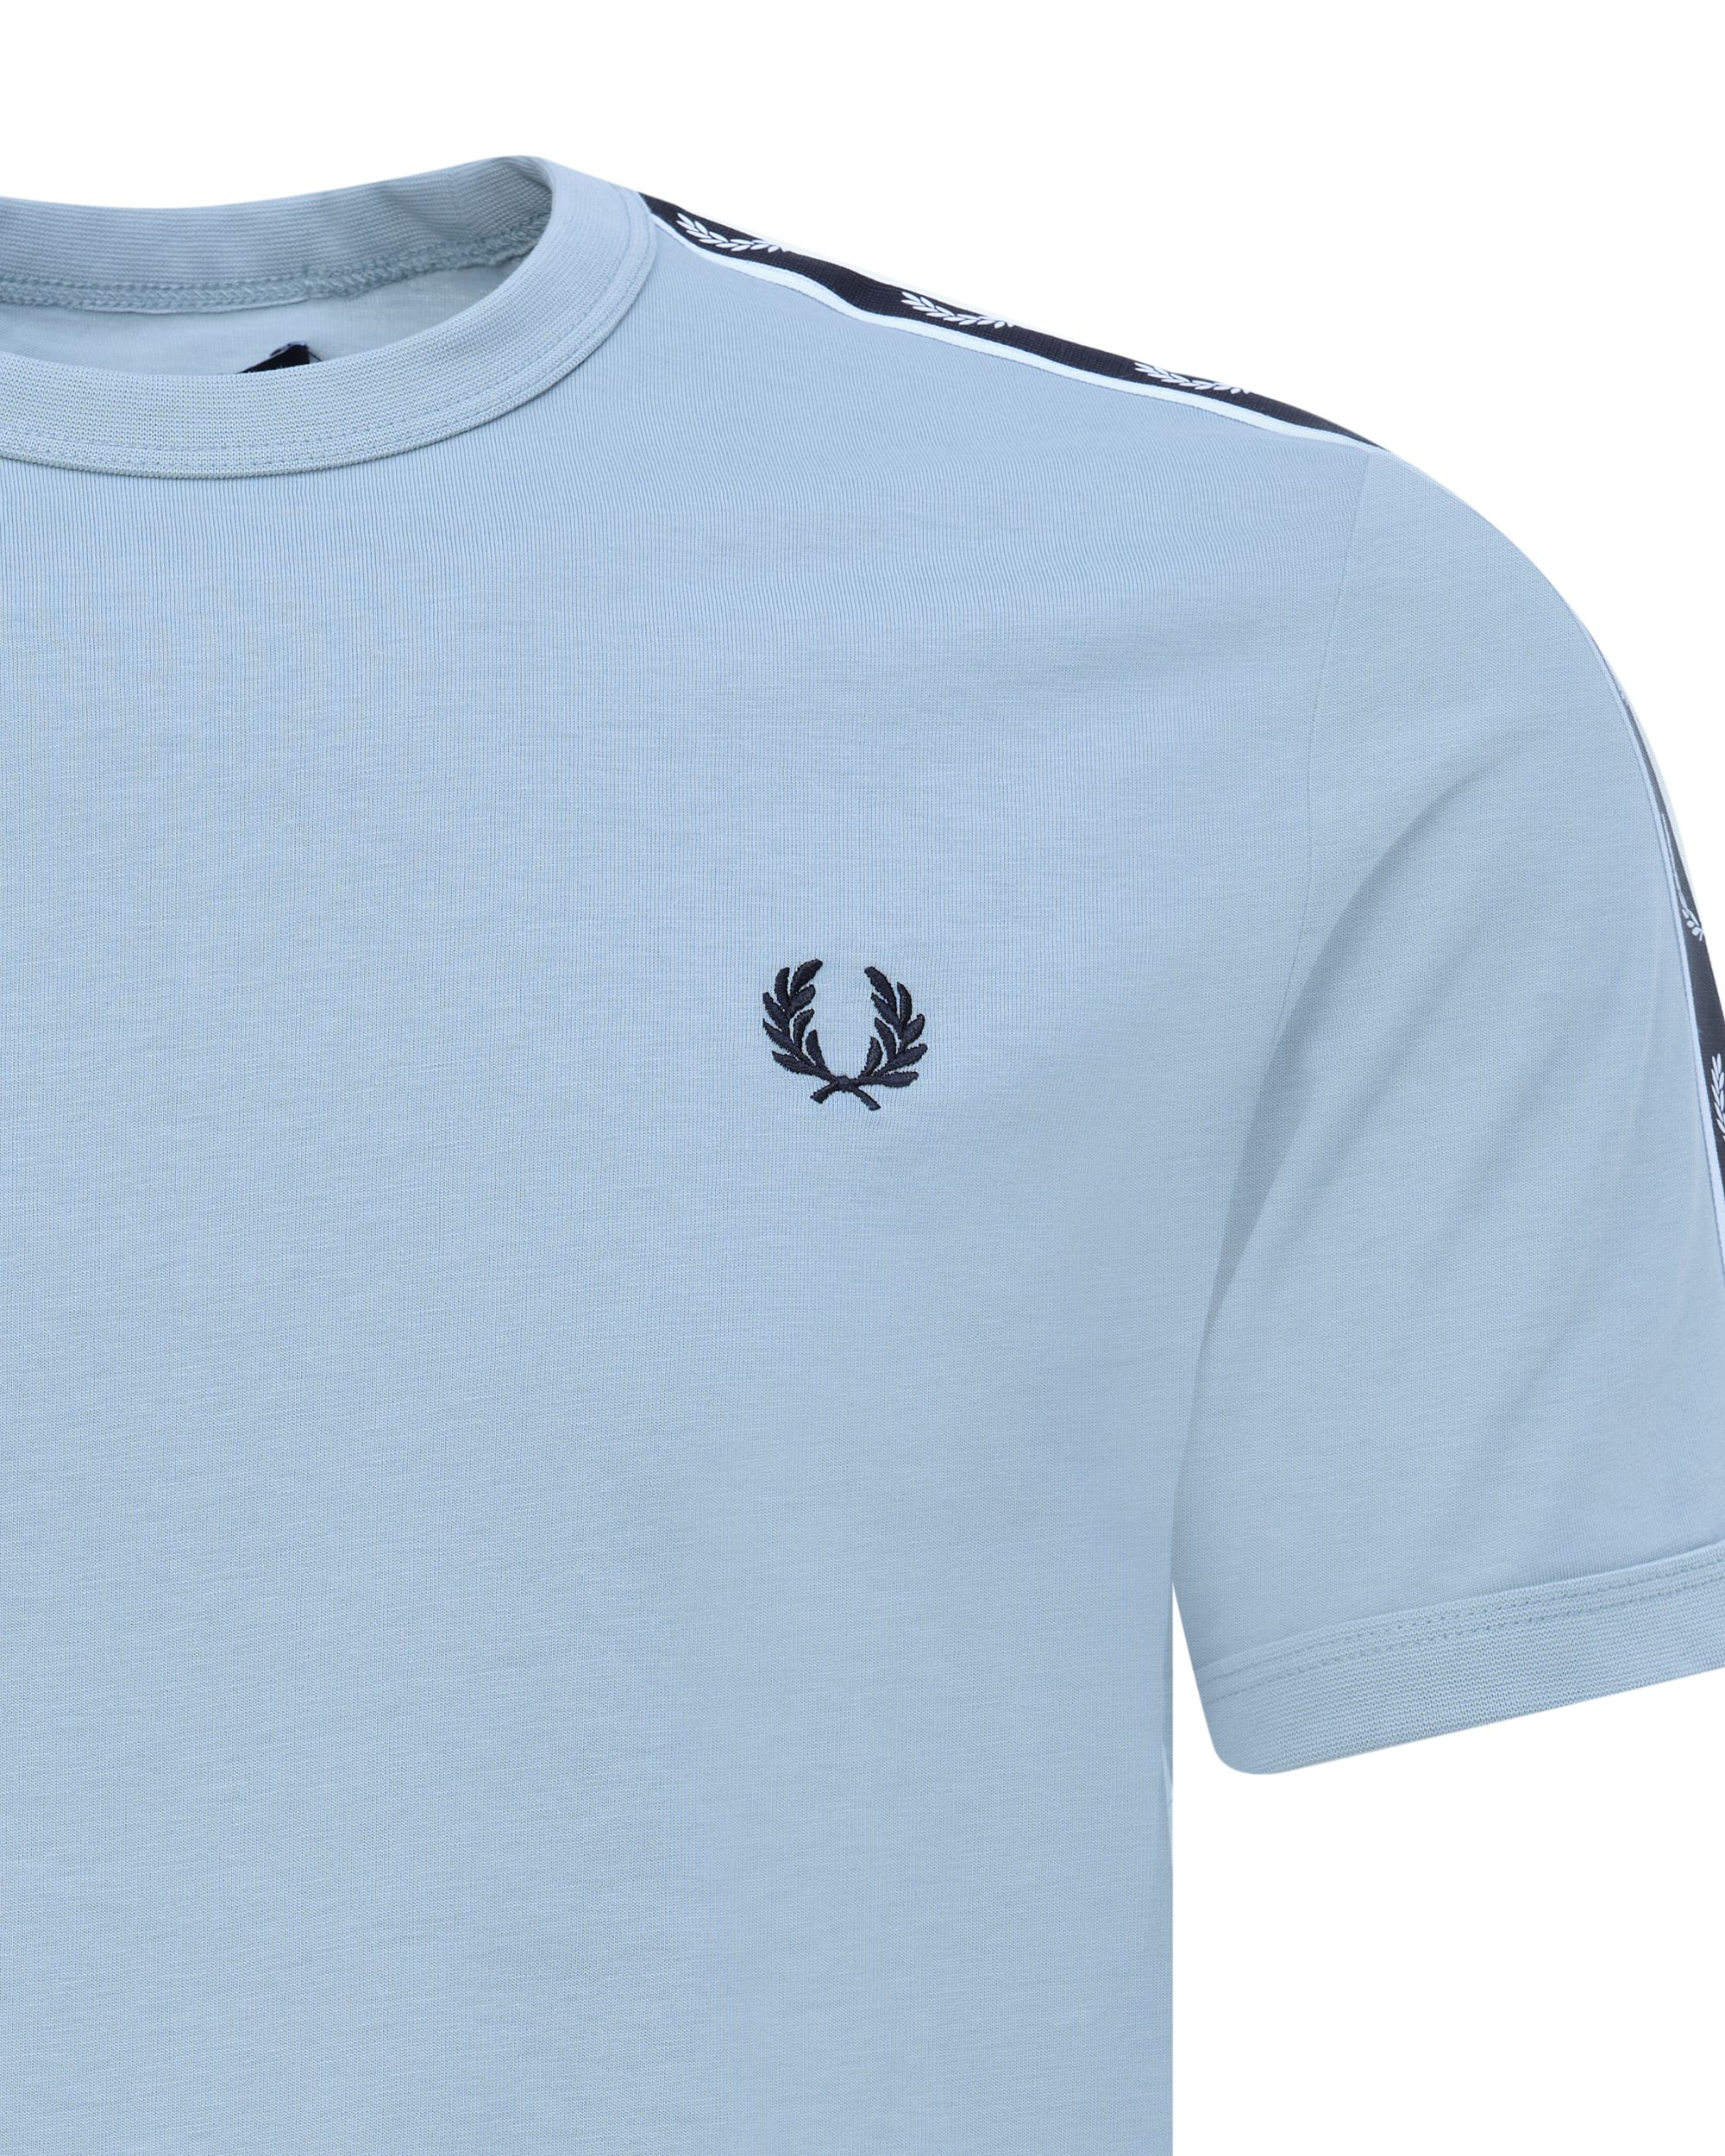 Fred Perry T-shirt KM Blauw 080353-001-L